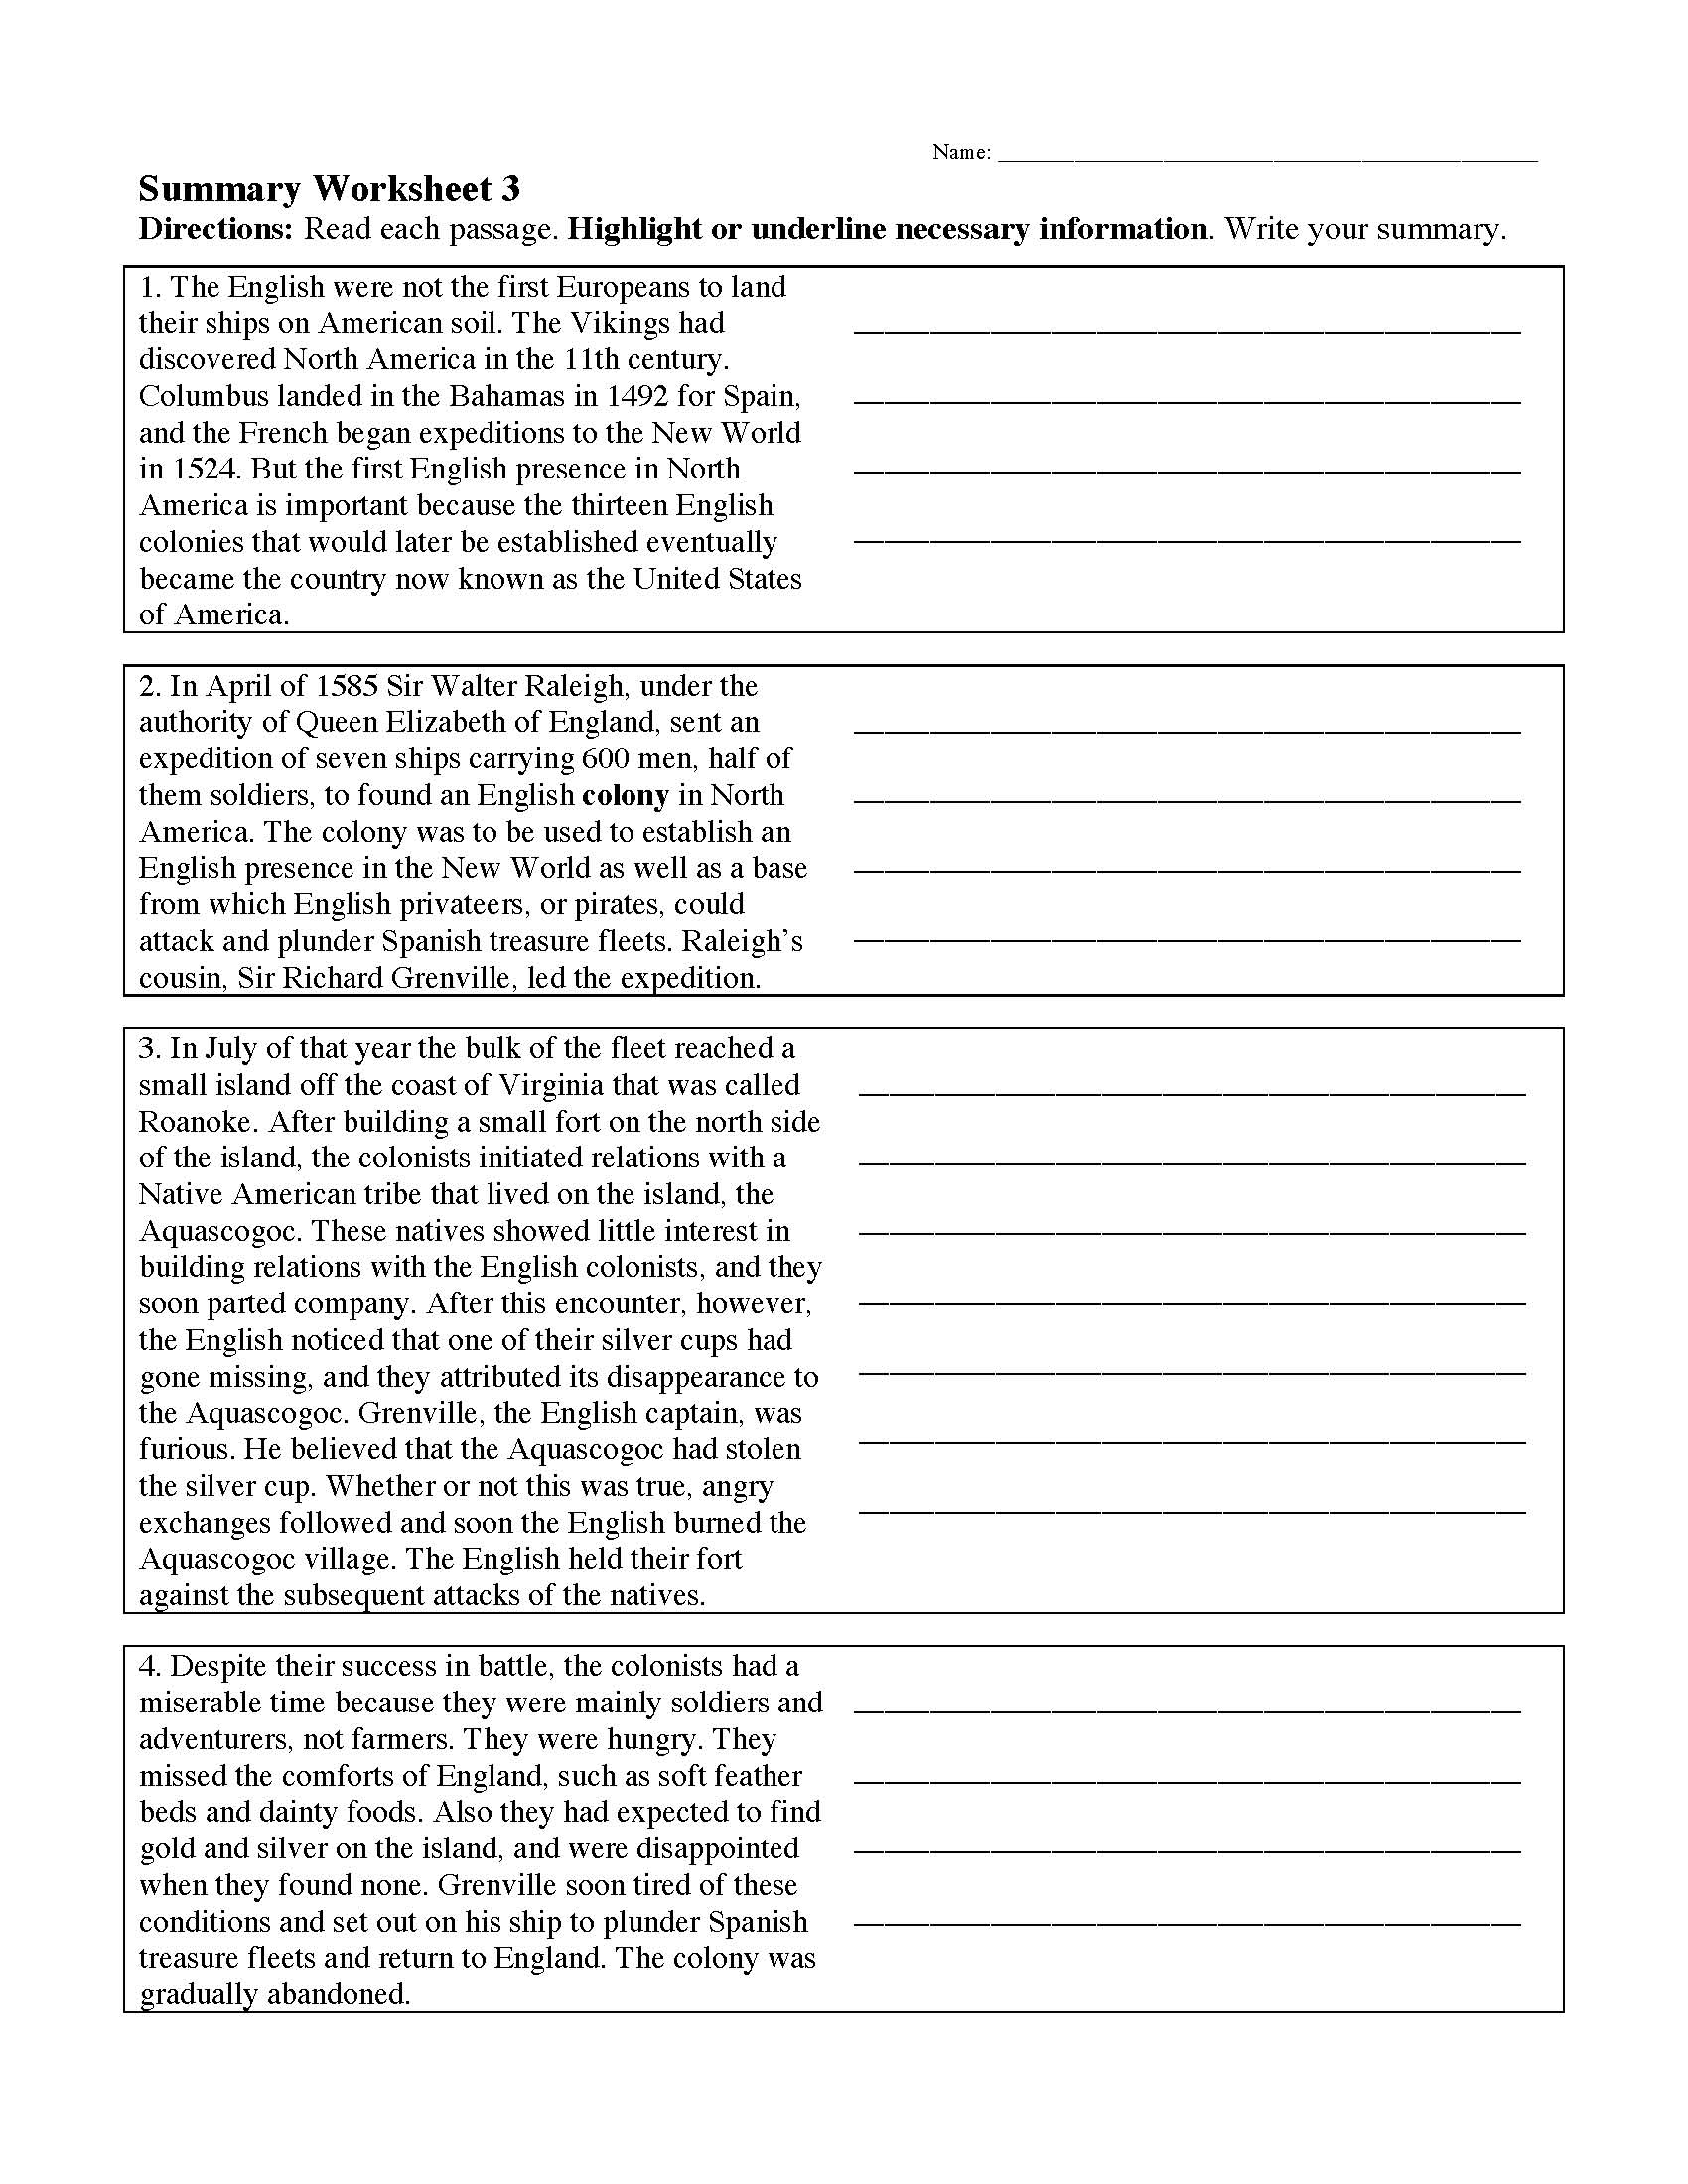 Summary Worksheet 3 Preview